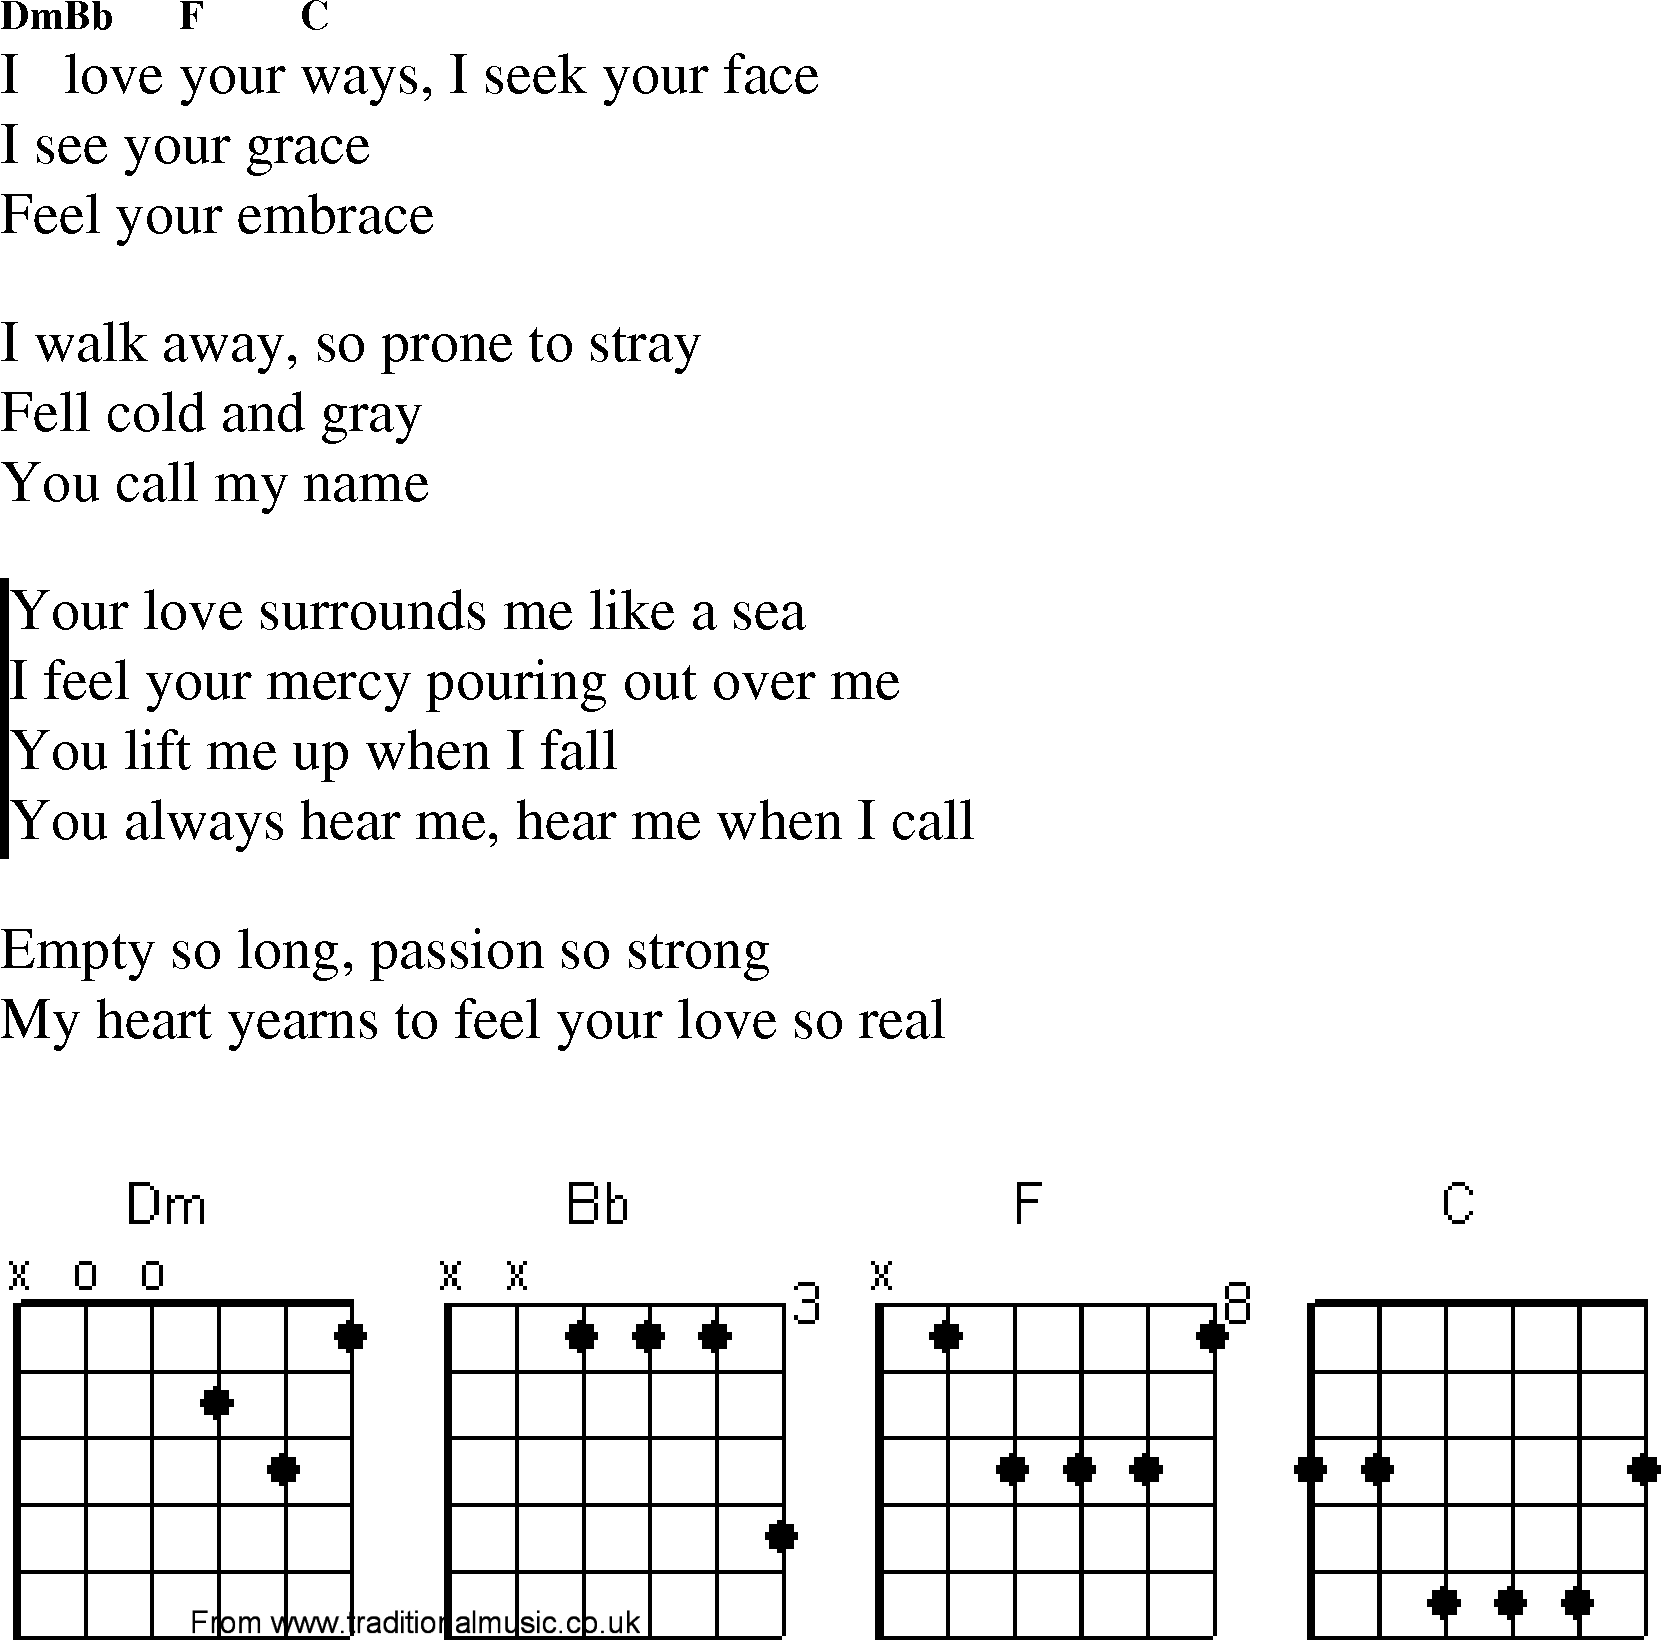 Gospel Song: your_love_surrounds, lyrics and chords.